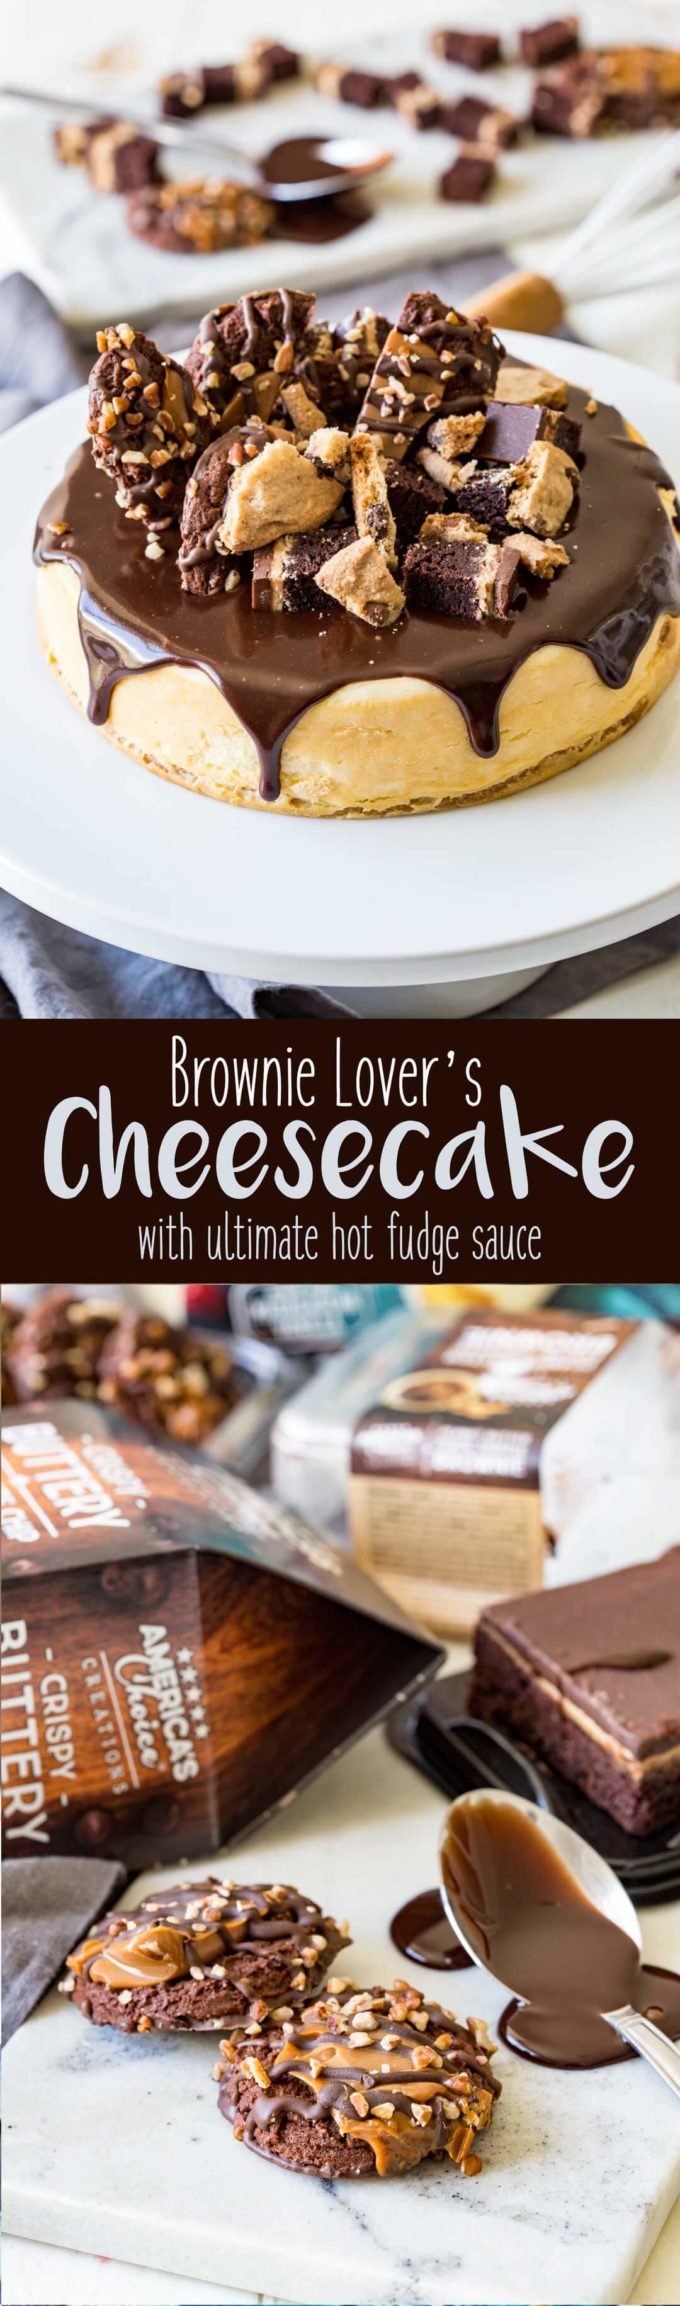 The ultimate easy DESSERT, this brownie lover's cheesecake has the best hot fudge sauce, and comes together in minutes!